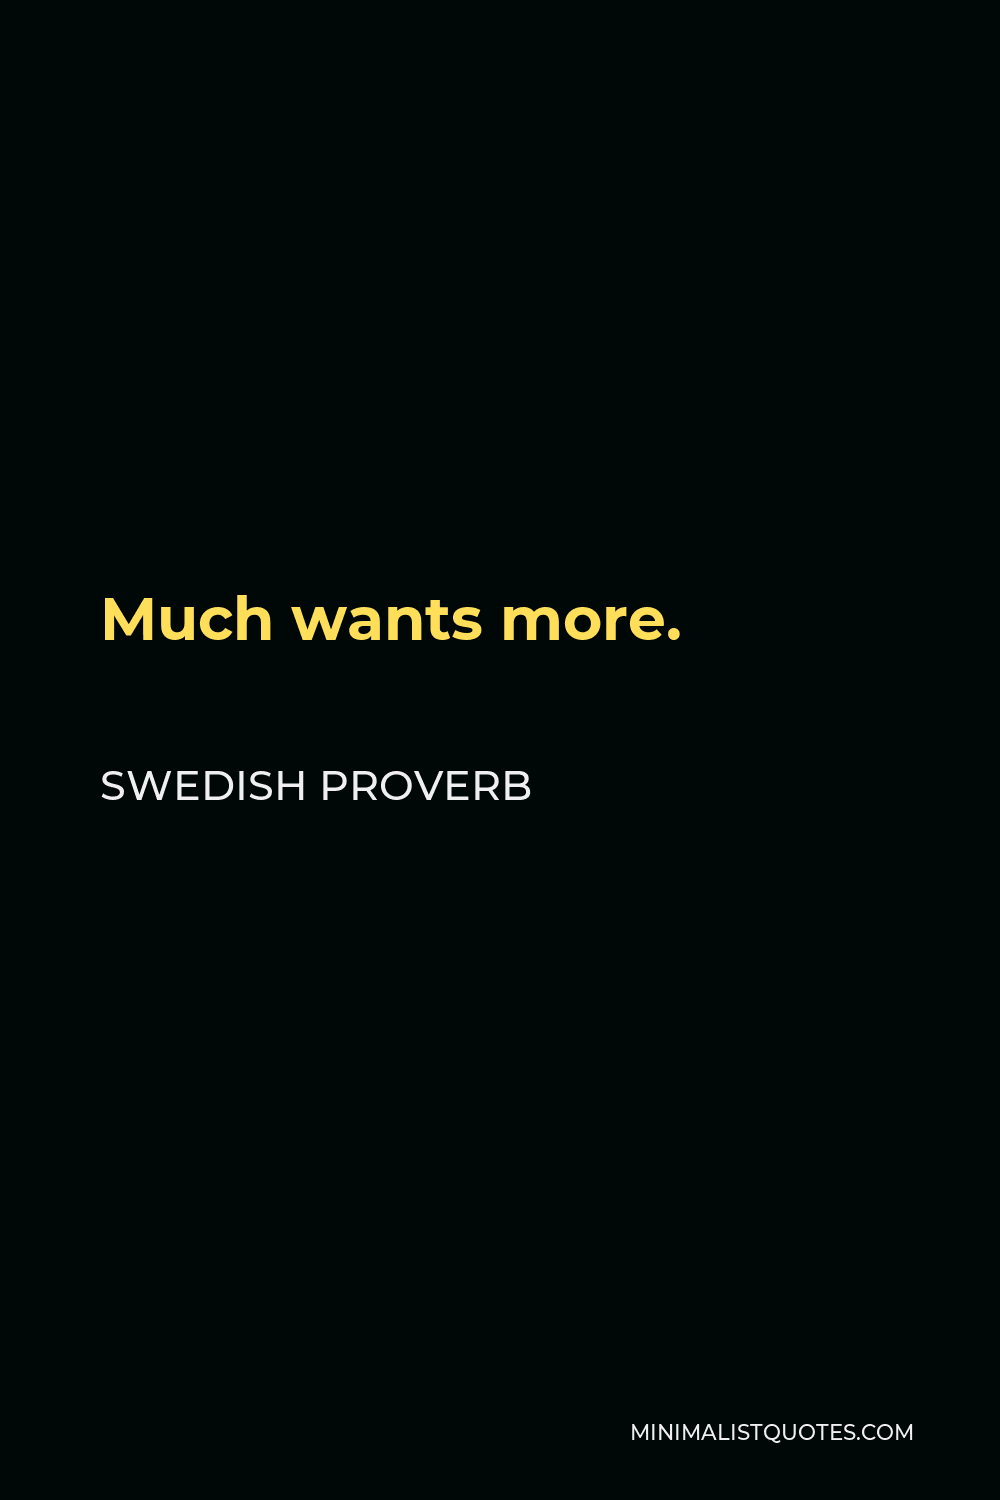 Swedish Proverb Quote - Much wants more.